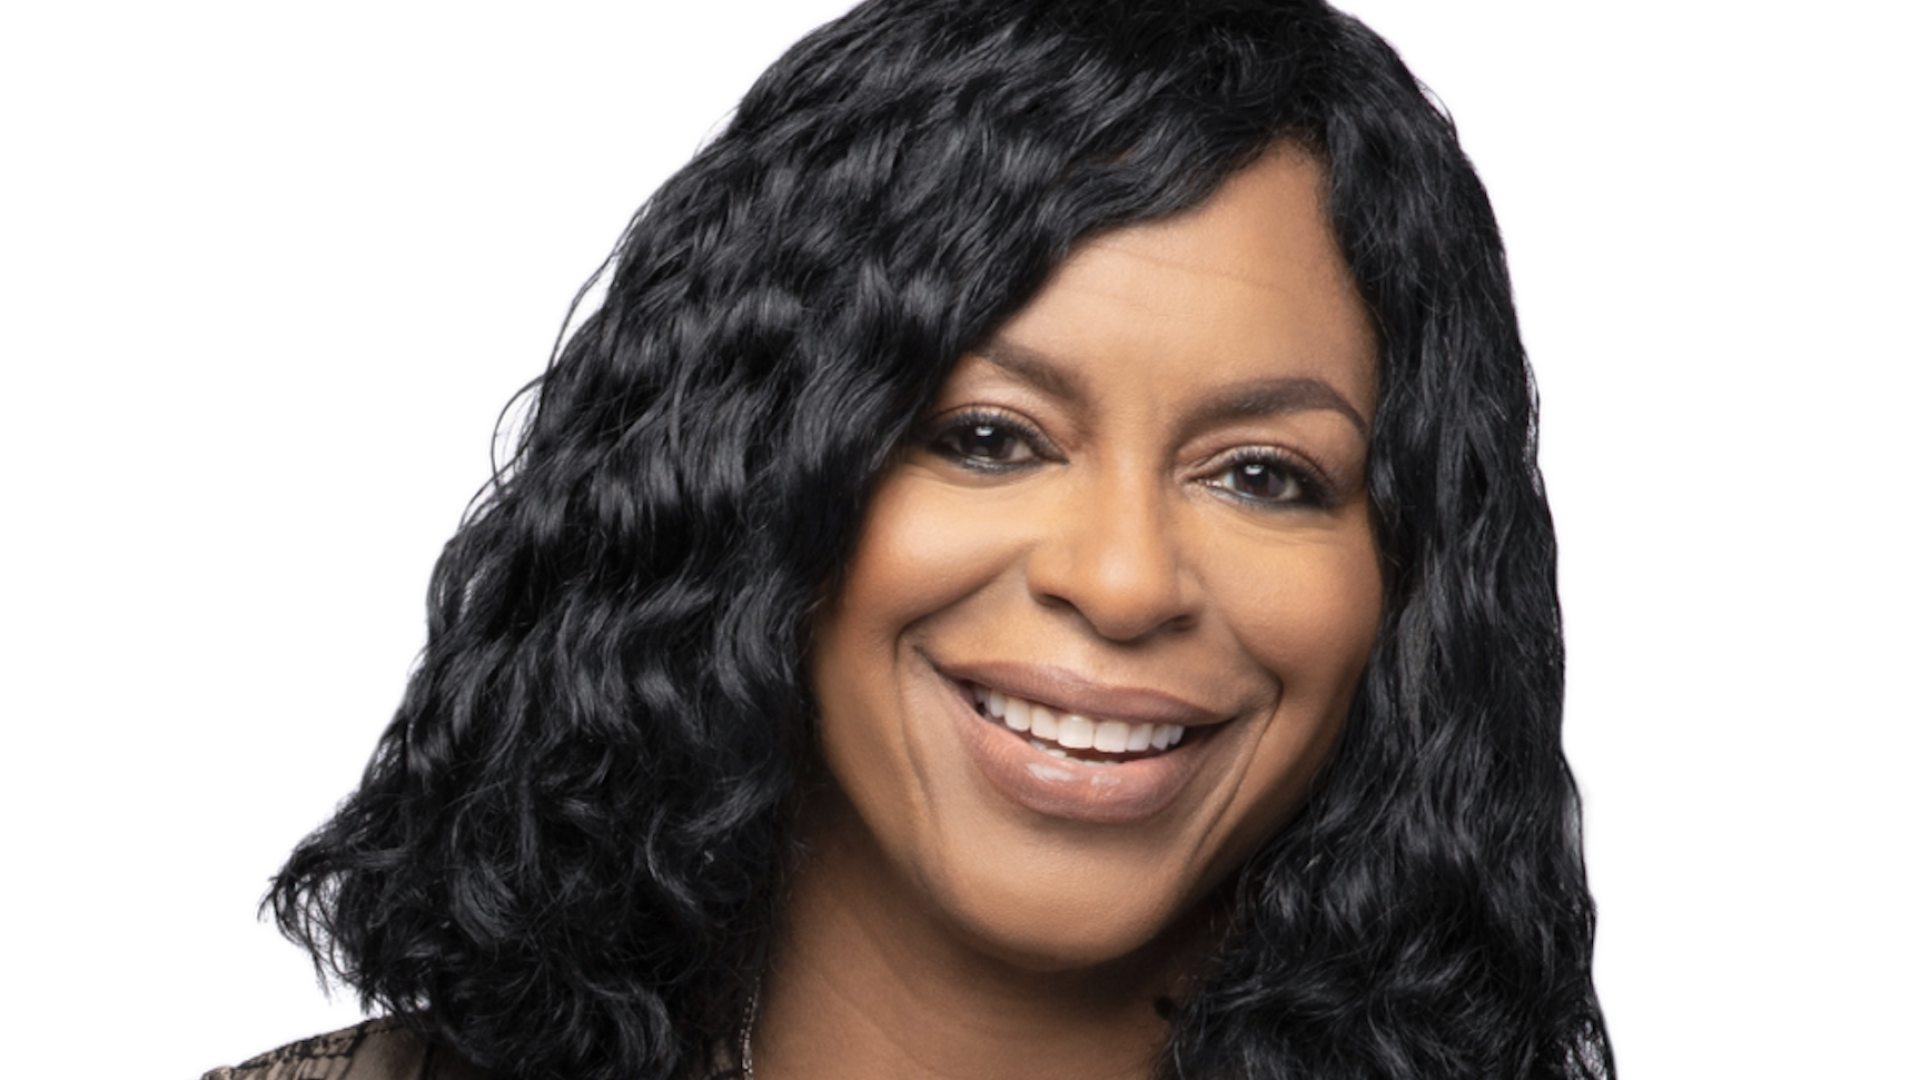 ‘OneTen’ CEO Debbie Dyson And The Quest To Find One Million Black People Jobs